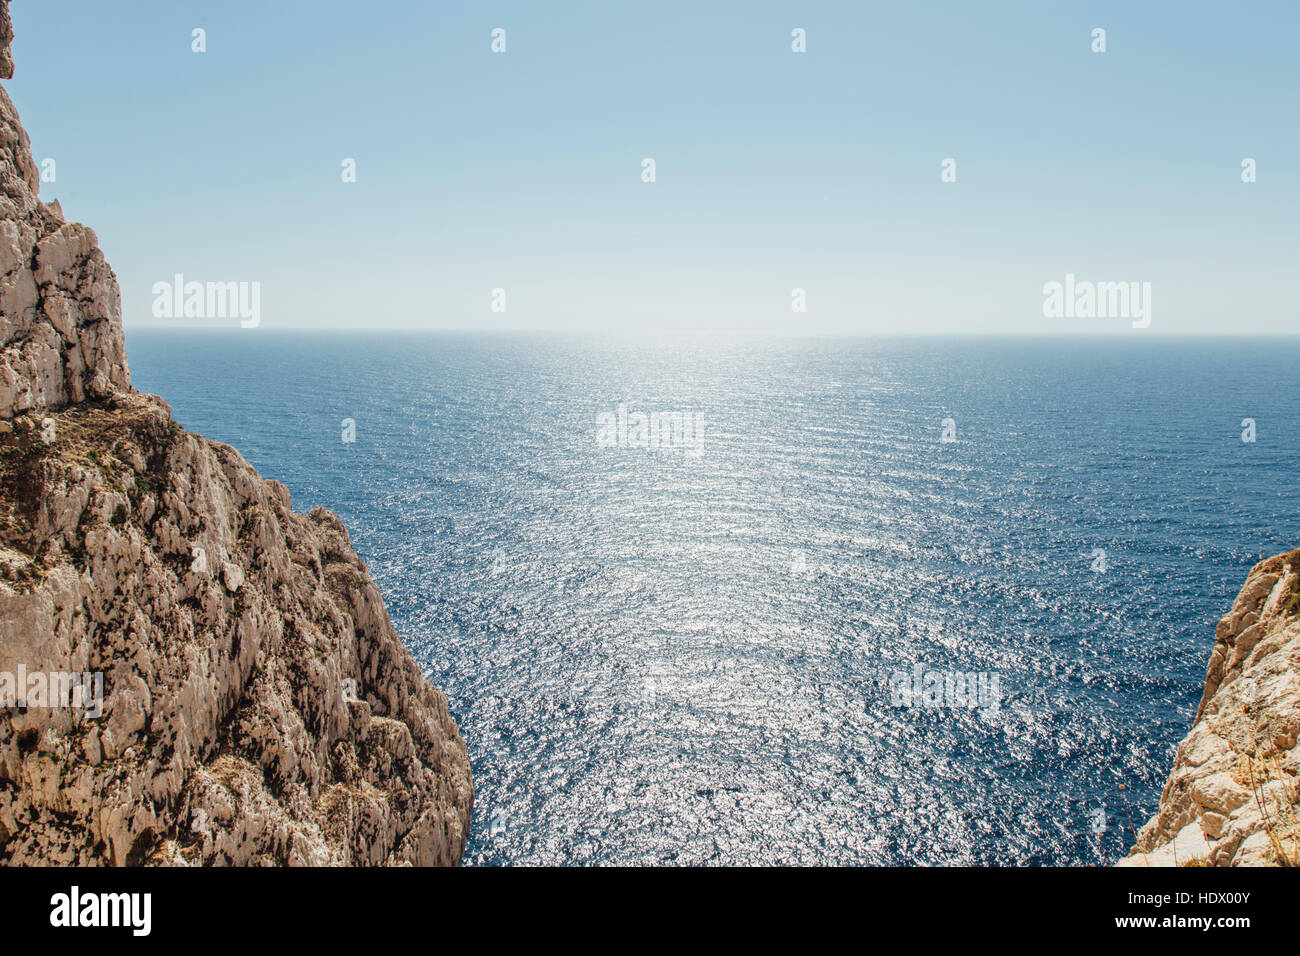 Scenic view of ocean near rock formation Stock Photo